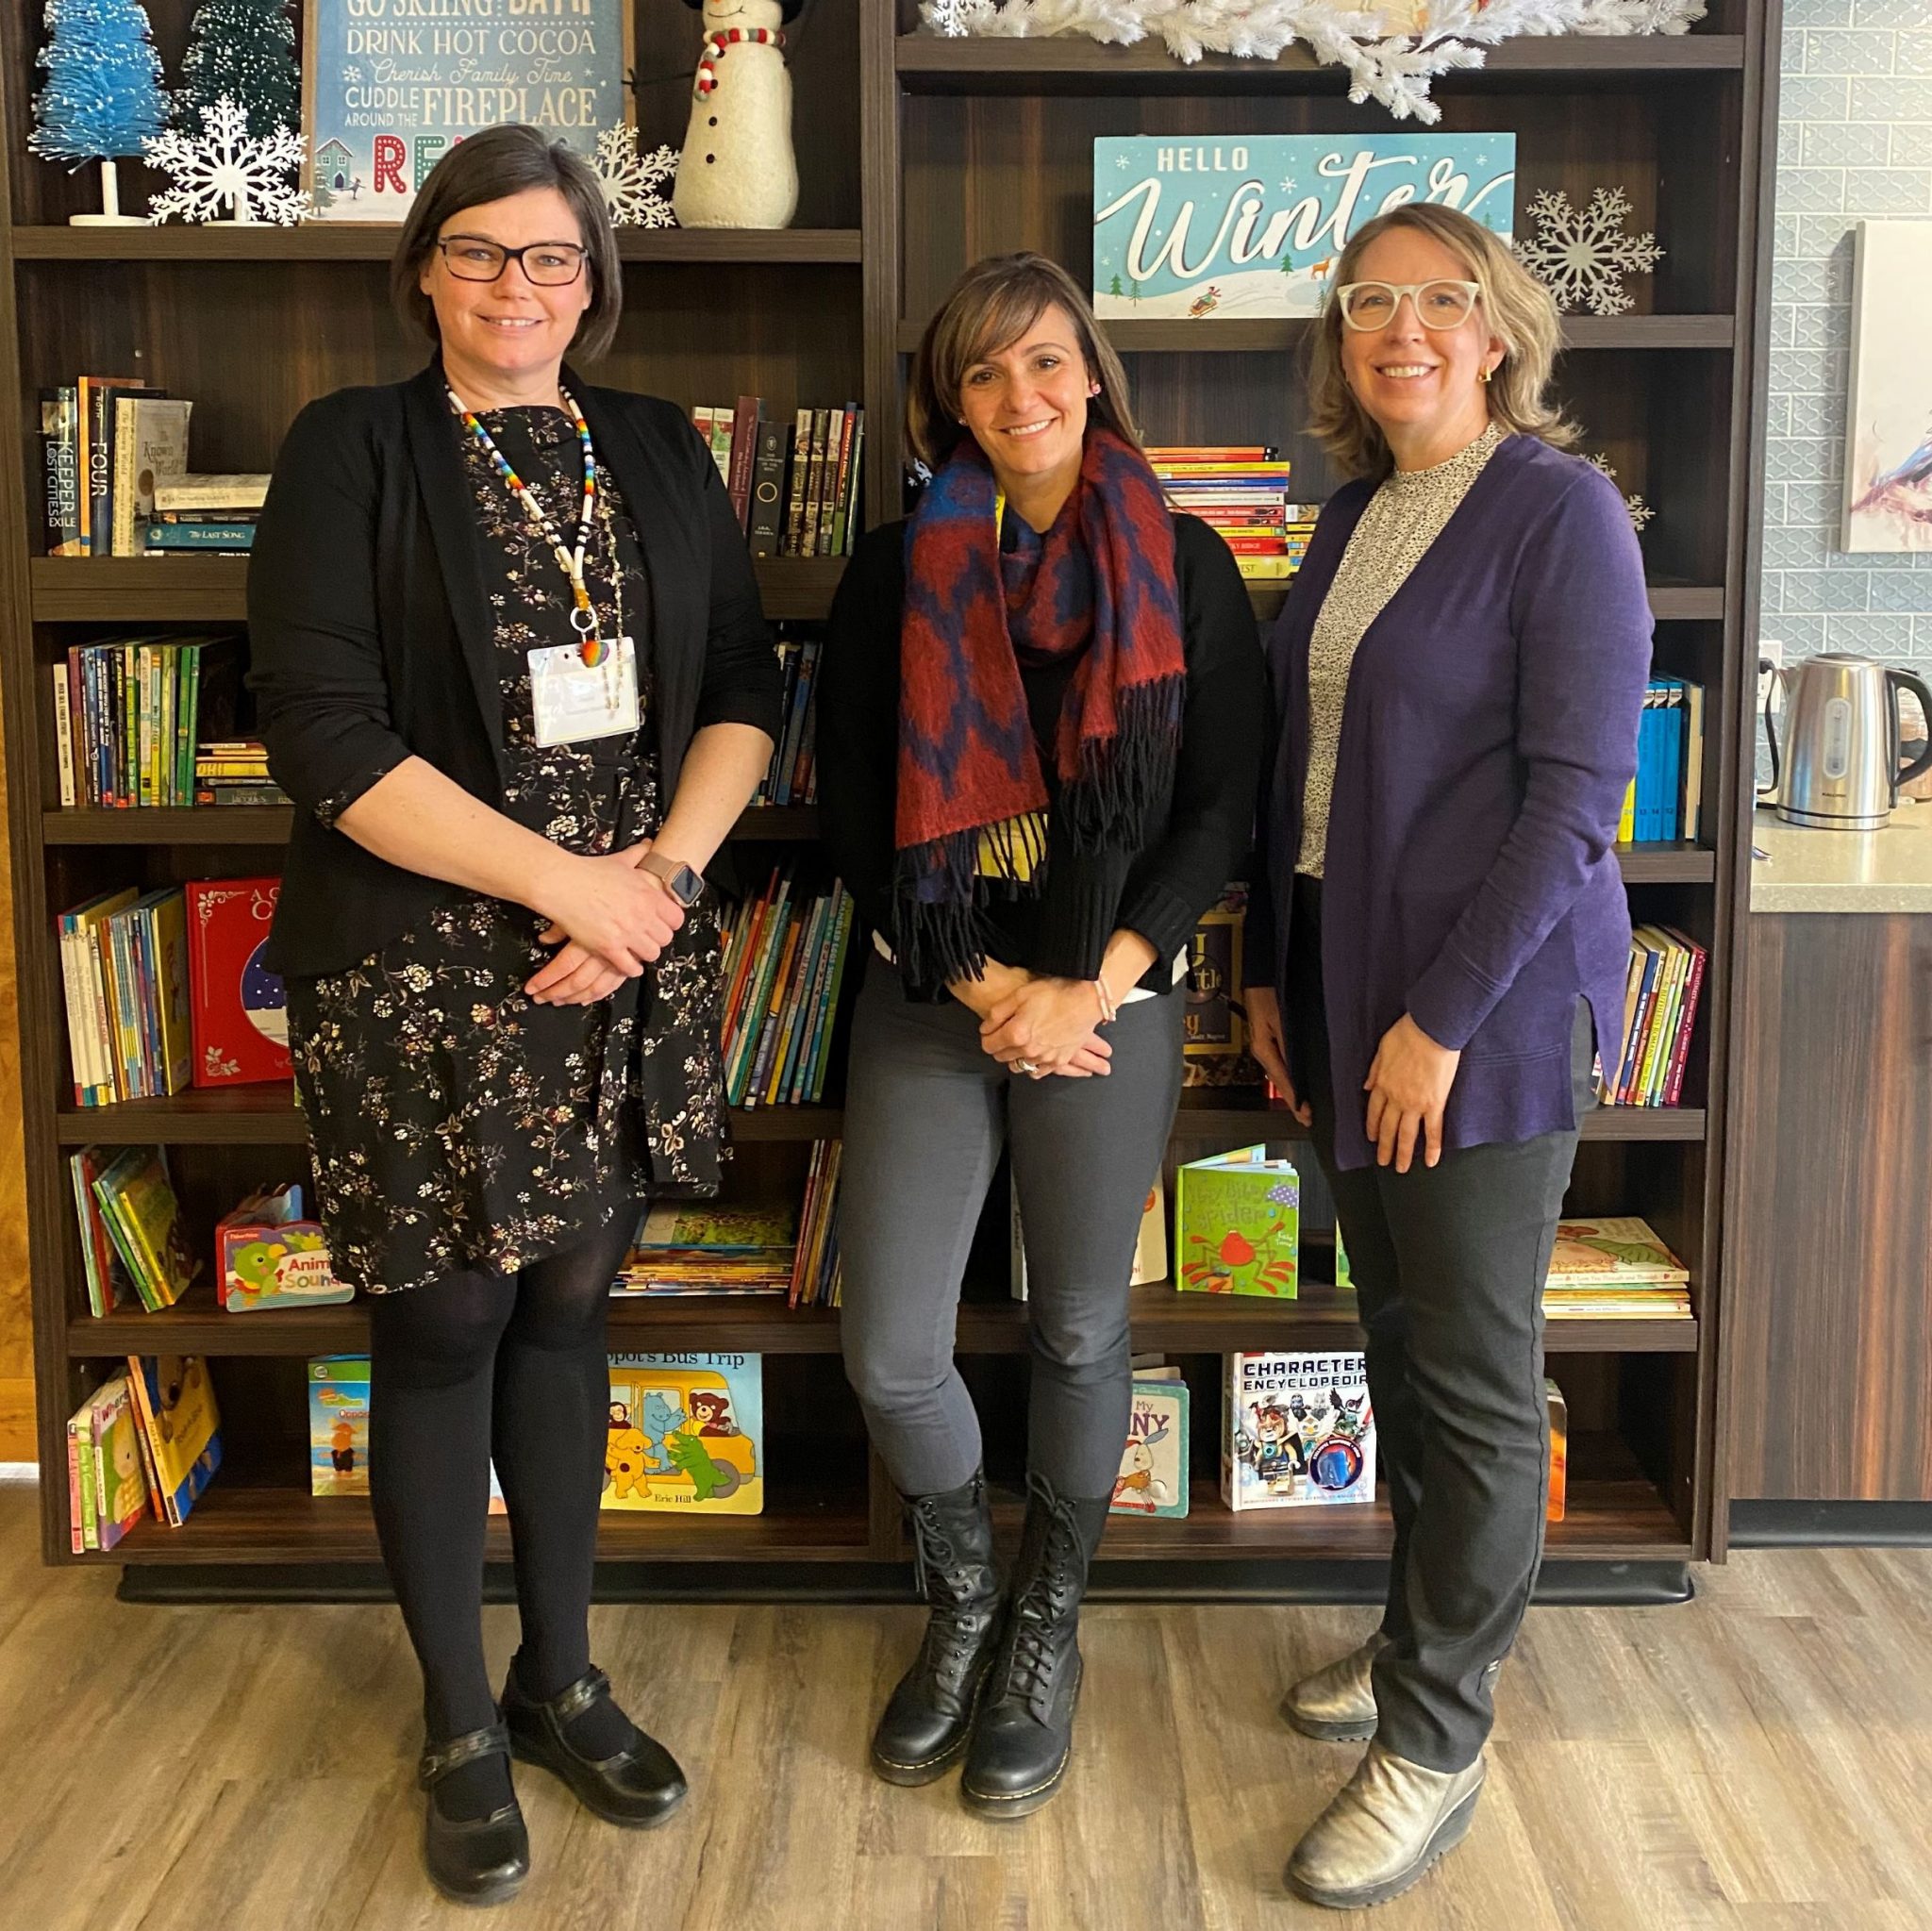 Councillor Sharp with staff from Discovery House: Leslie Hill, Executive Director; and Anita Hofer, Director of Strategy and Communications